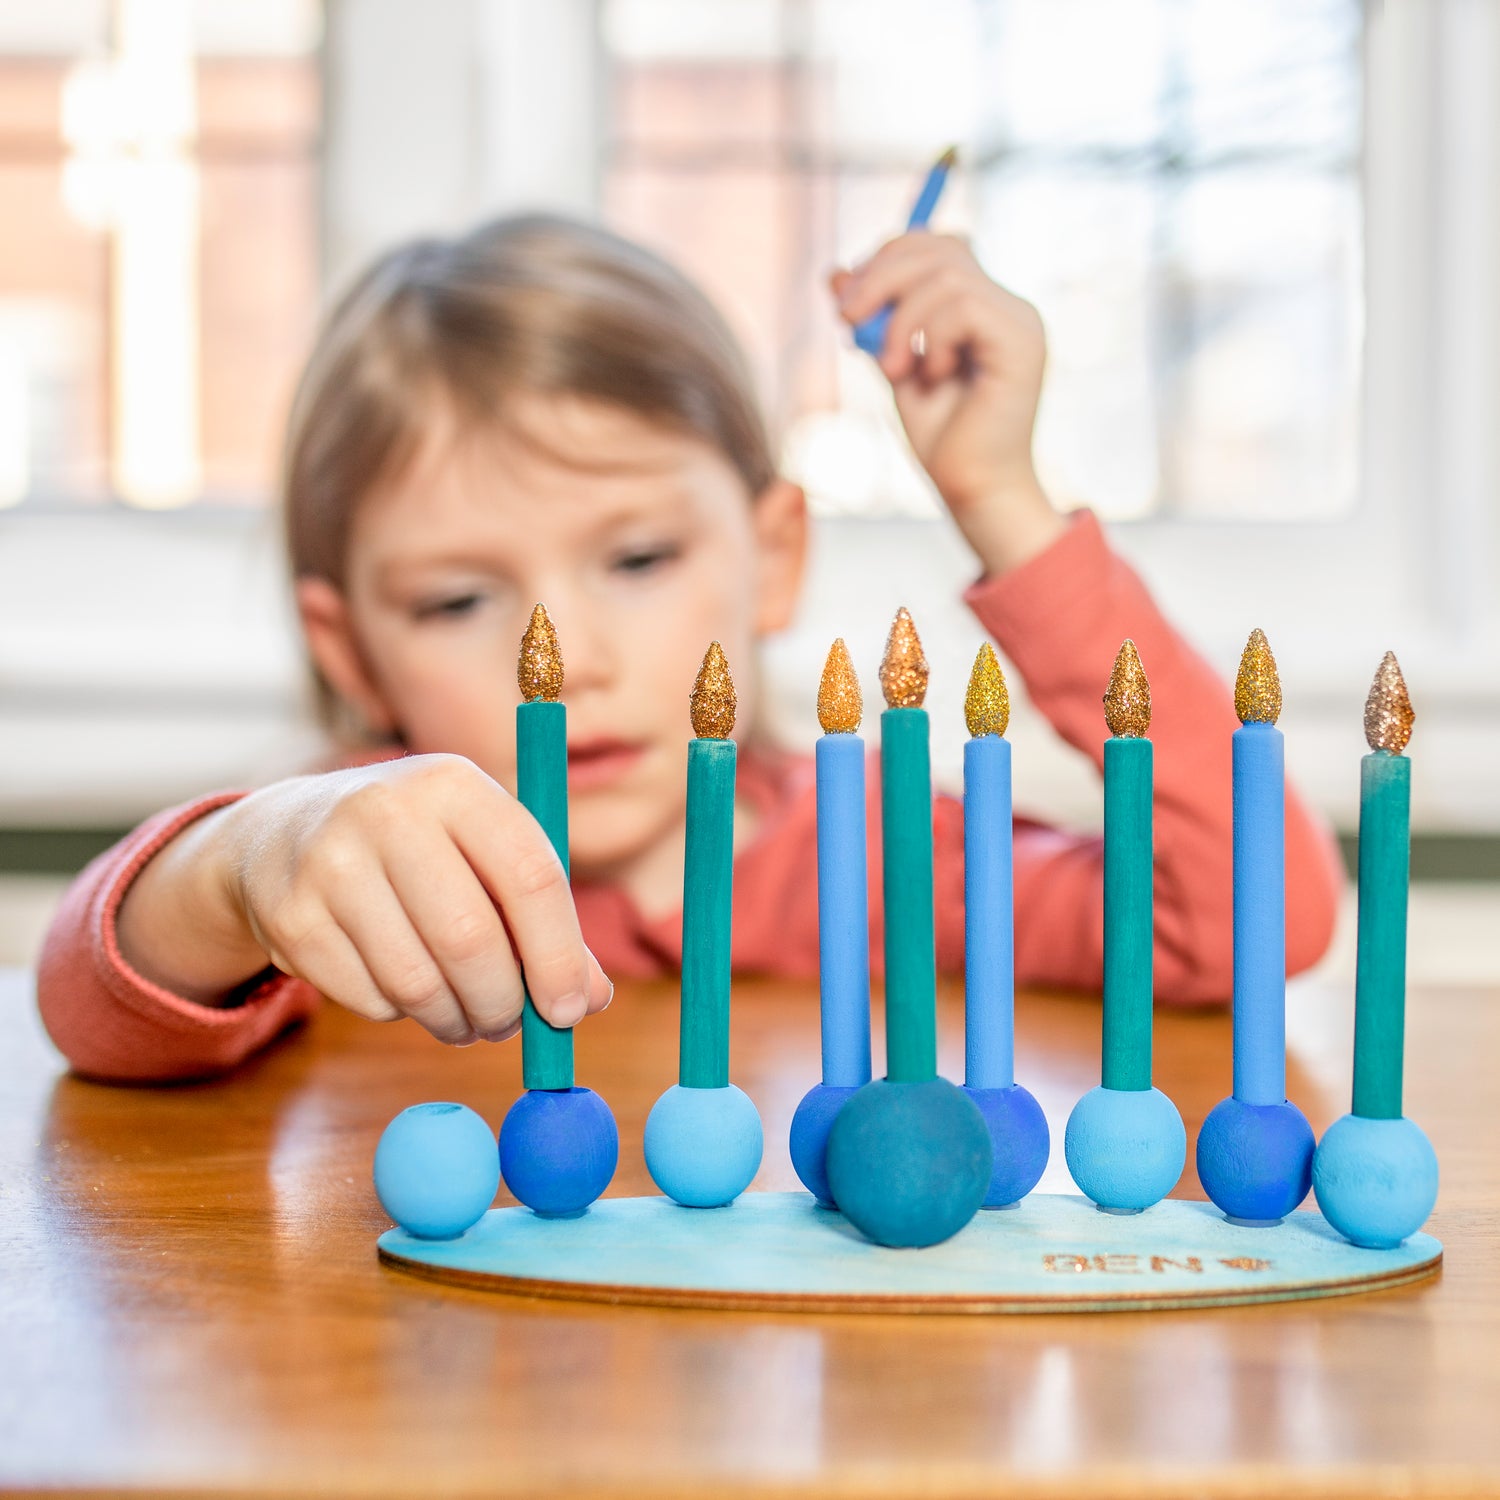 "Hanukkah gift ideas: Explore our collection of thoughtful presents for the holiday season. ALT: Child playing with self-made wooden play menorah, embodying the joy of Hanukkah."